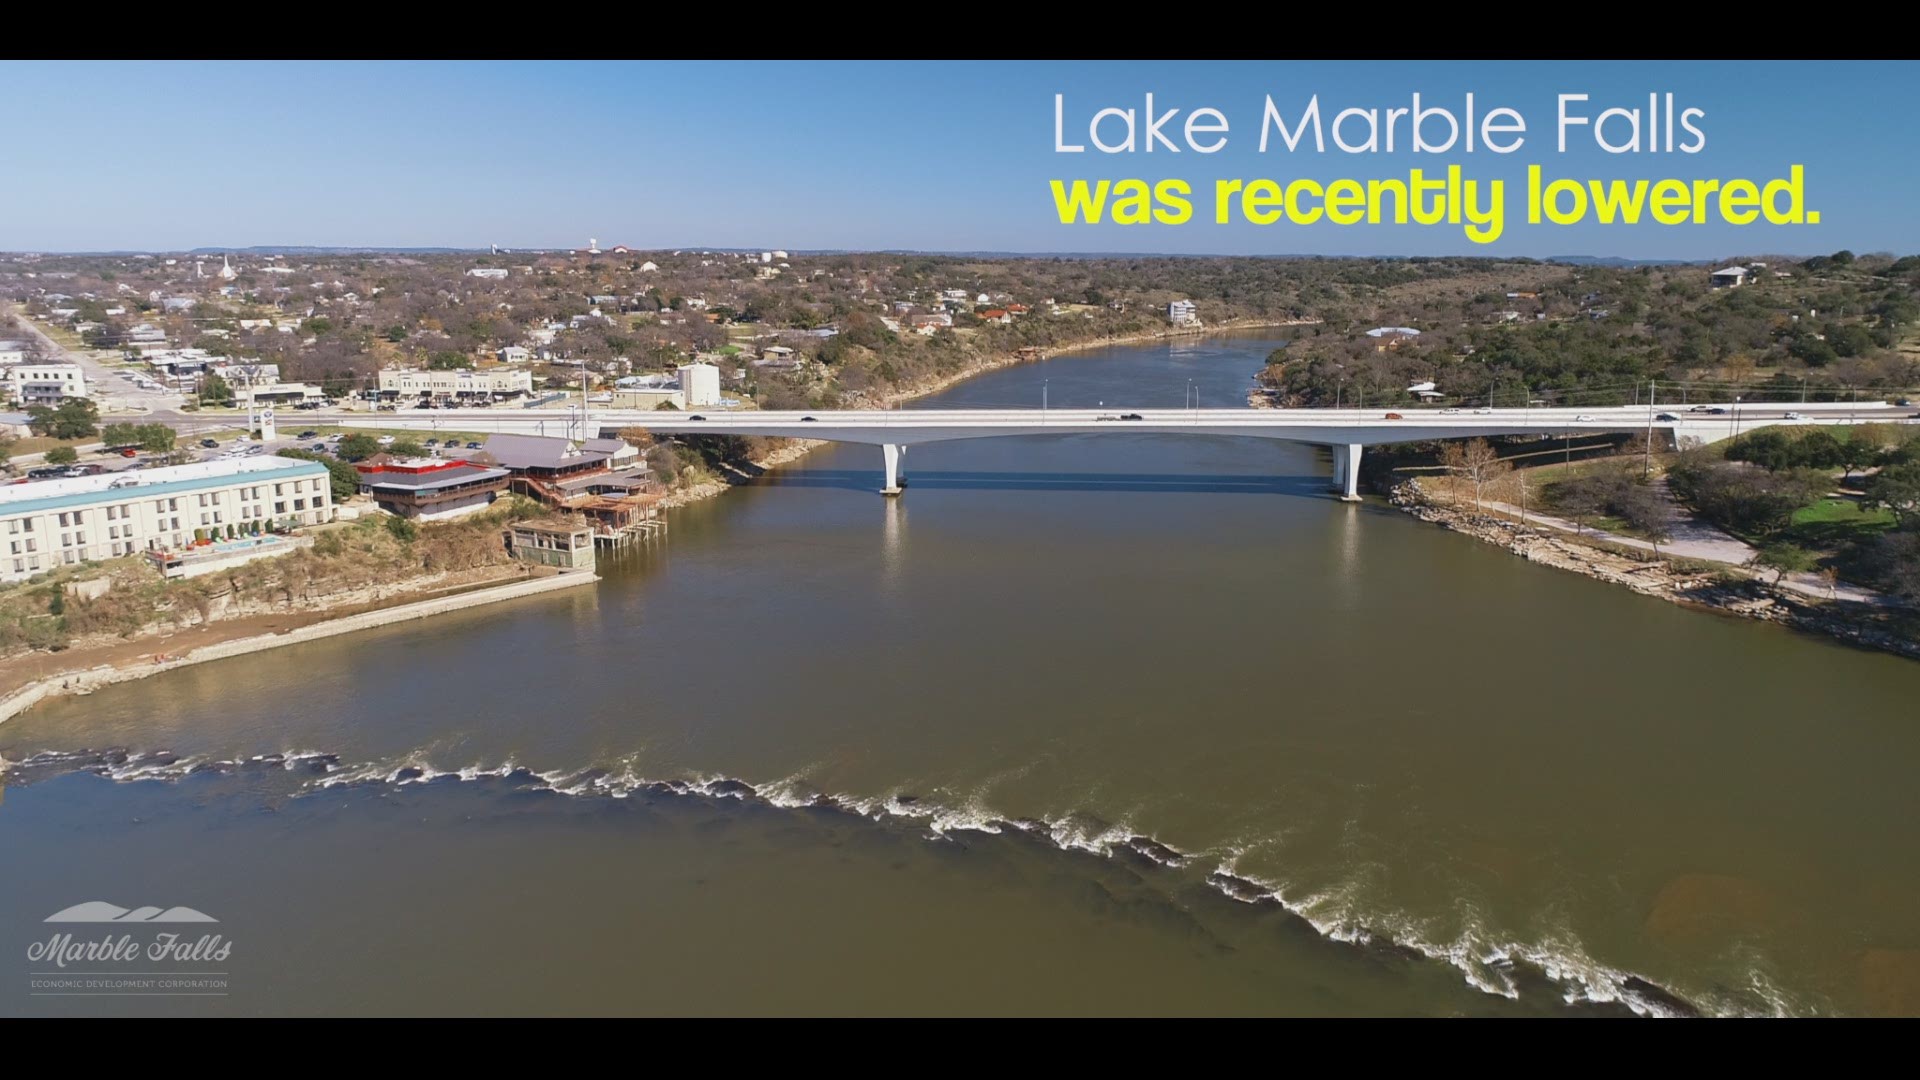 After floods impacted the Hill Country in October of 2019 some Hill Country Lakes were lowered to allow residents to rebuild. Thanks to the lowering of Lake Marble Falls, the towns namesake has been exposed.